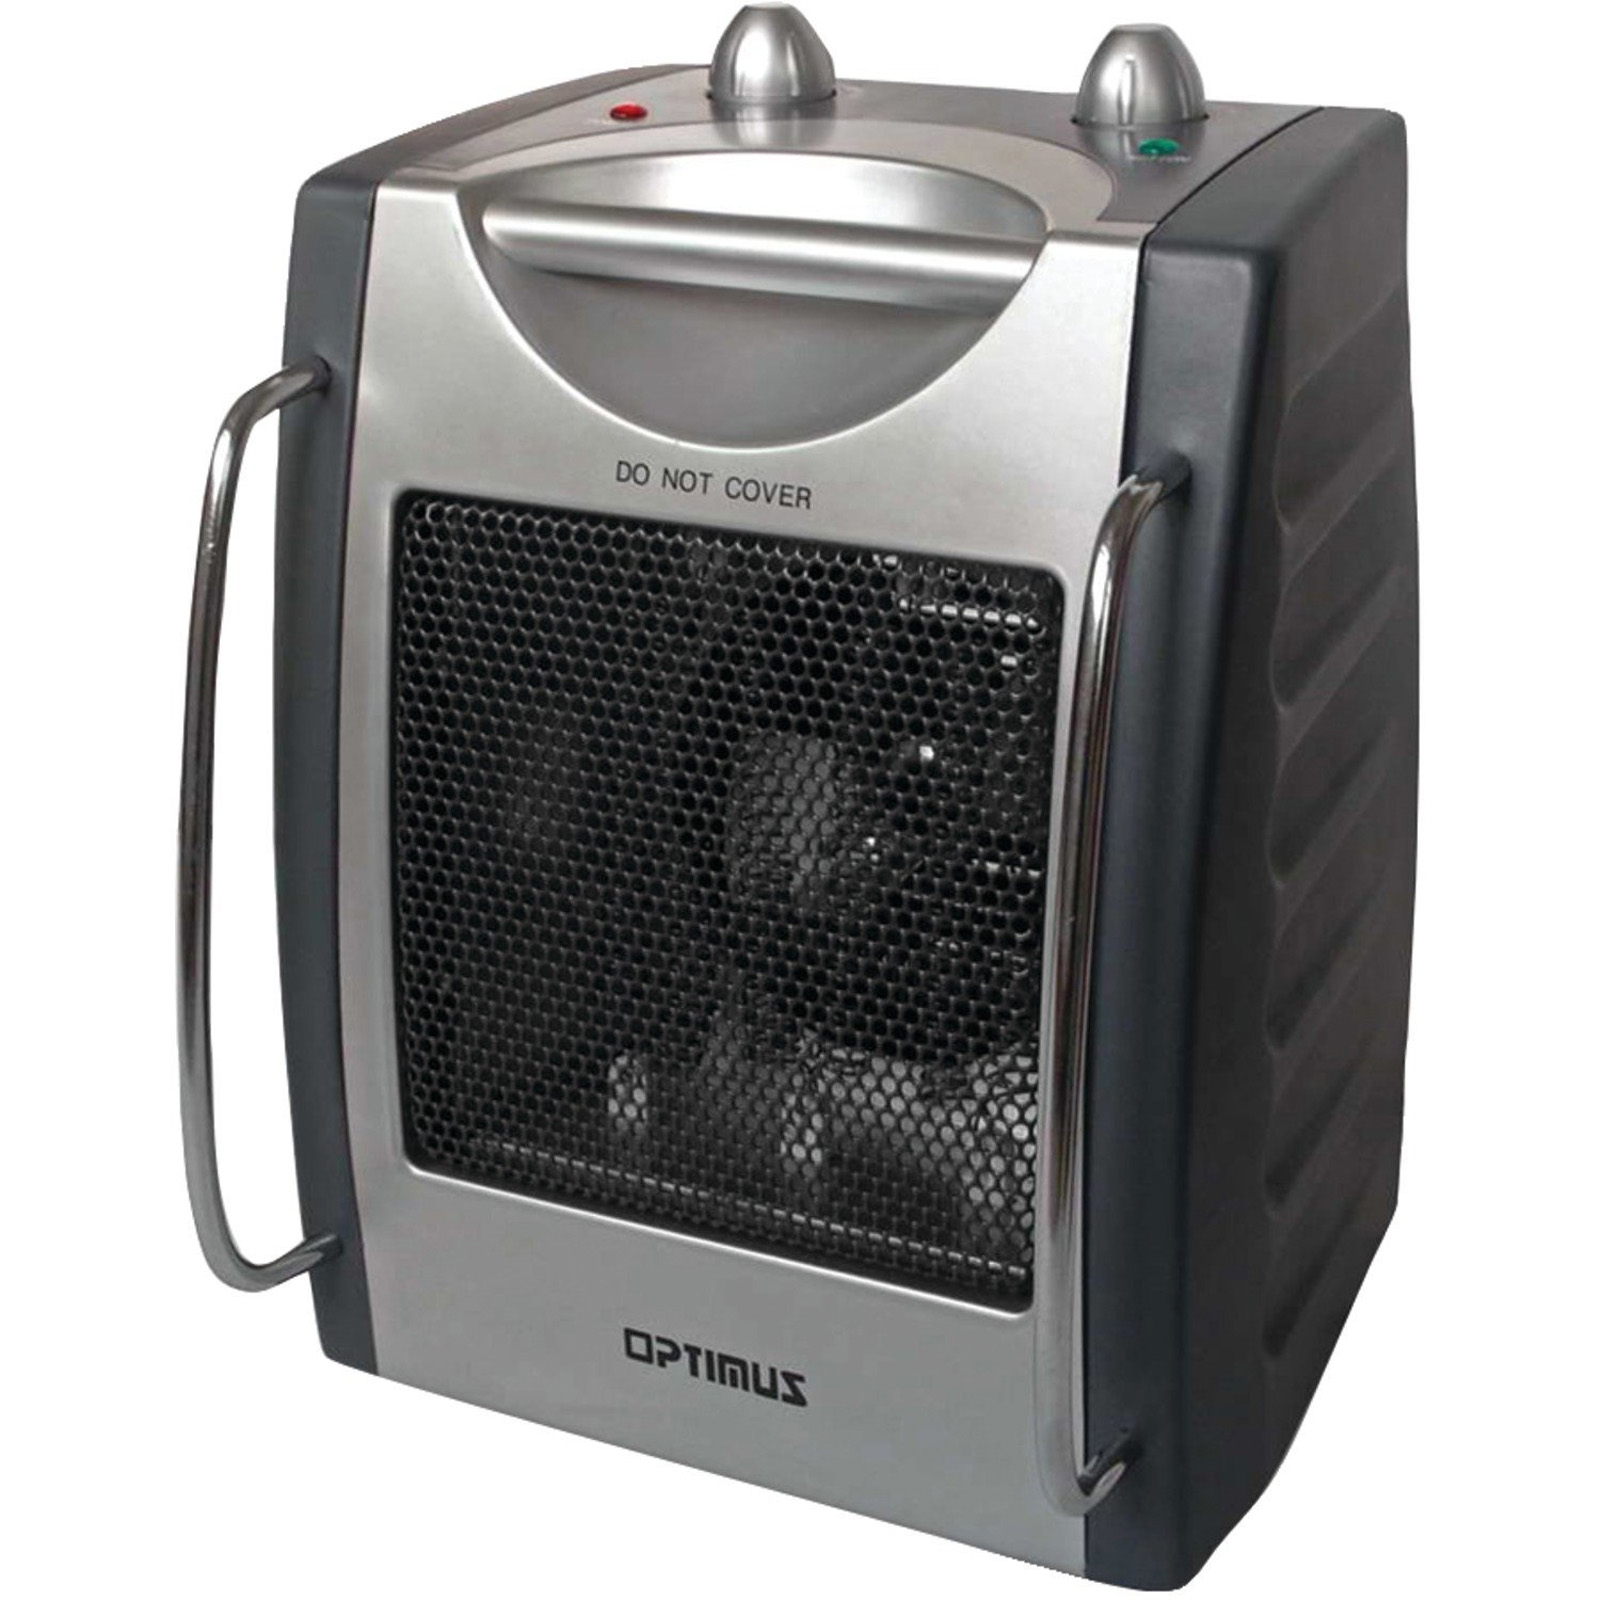 Heater Portable Utility Automatic Thermostat